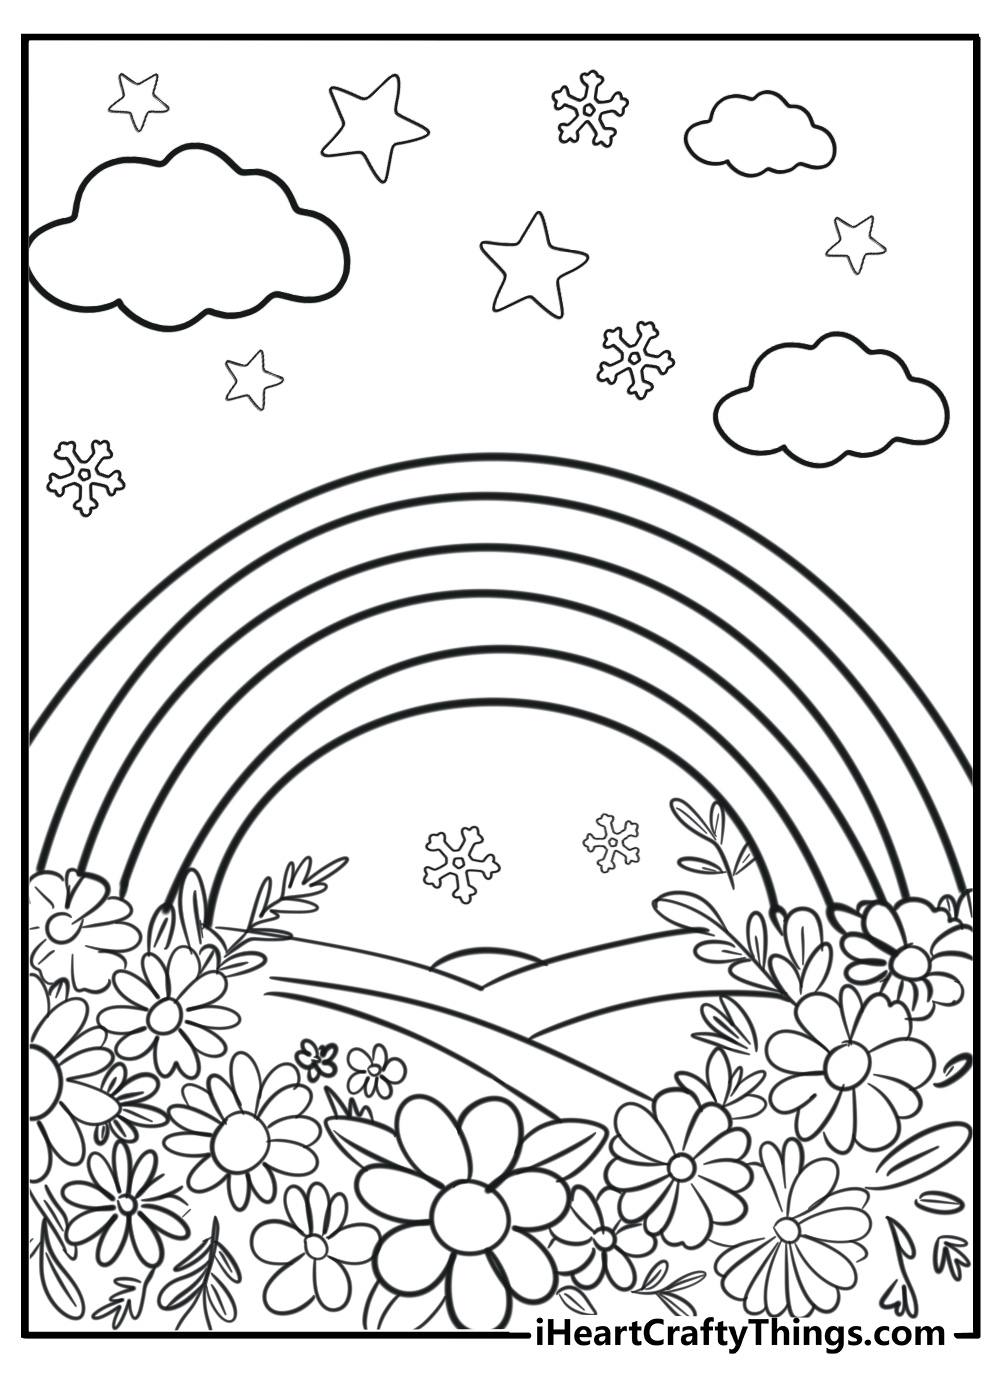 Easy rainbow with flowers coloring page for preschoolers